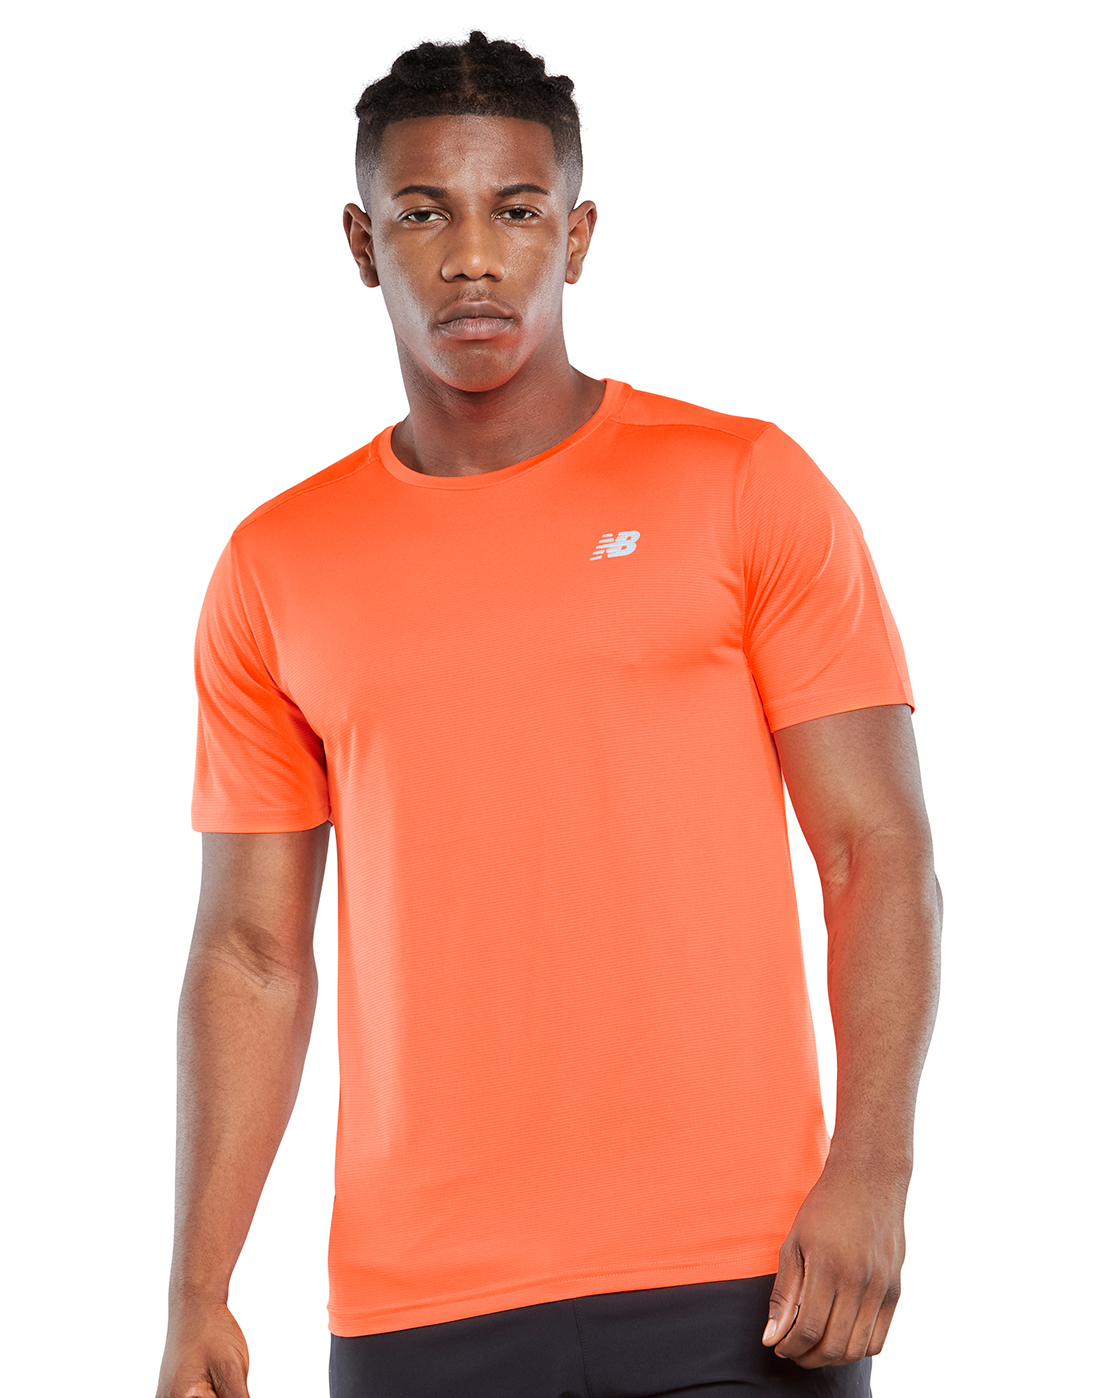 New Balance Mens Accelerate SS T-Shirt - Orange | Life Style Sports IE